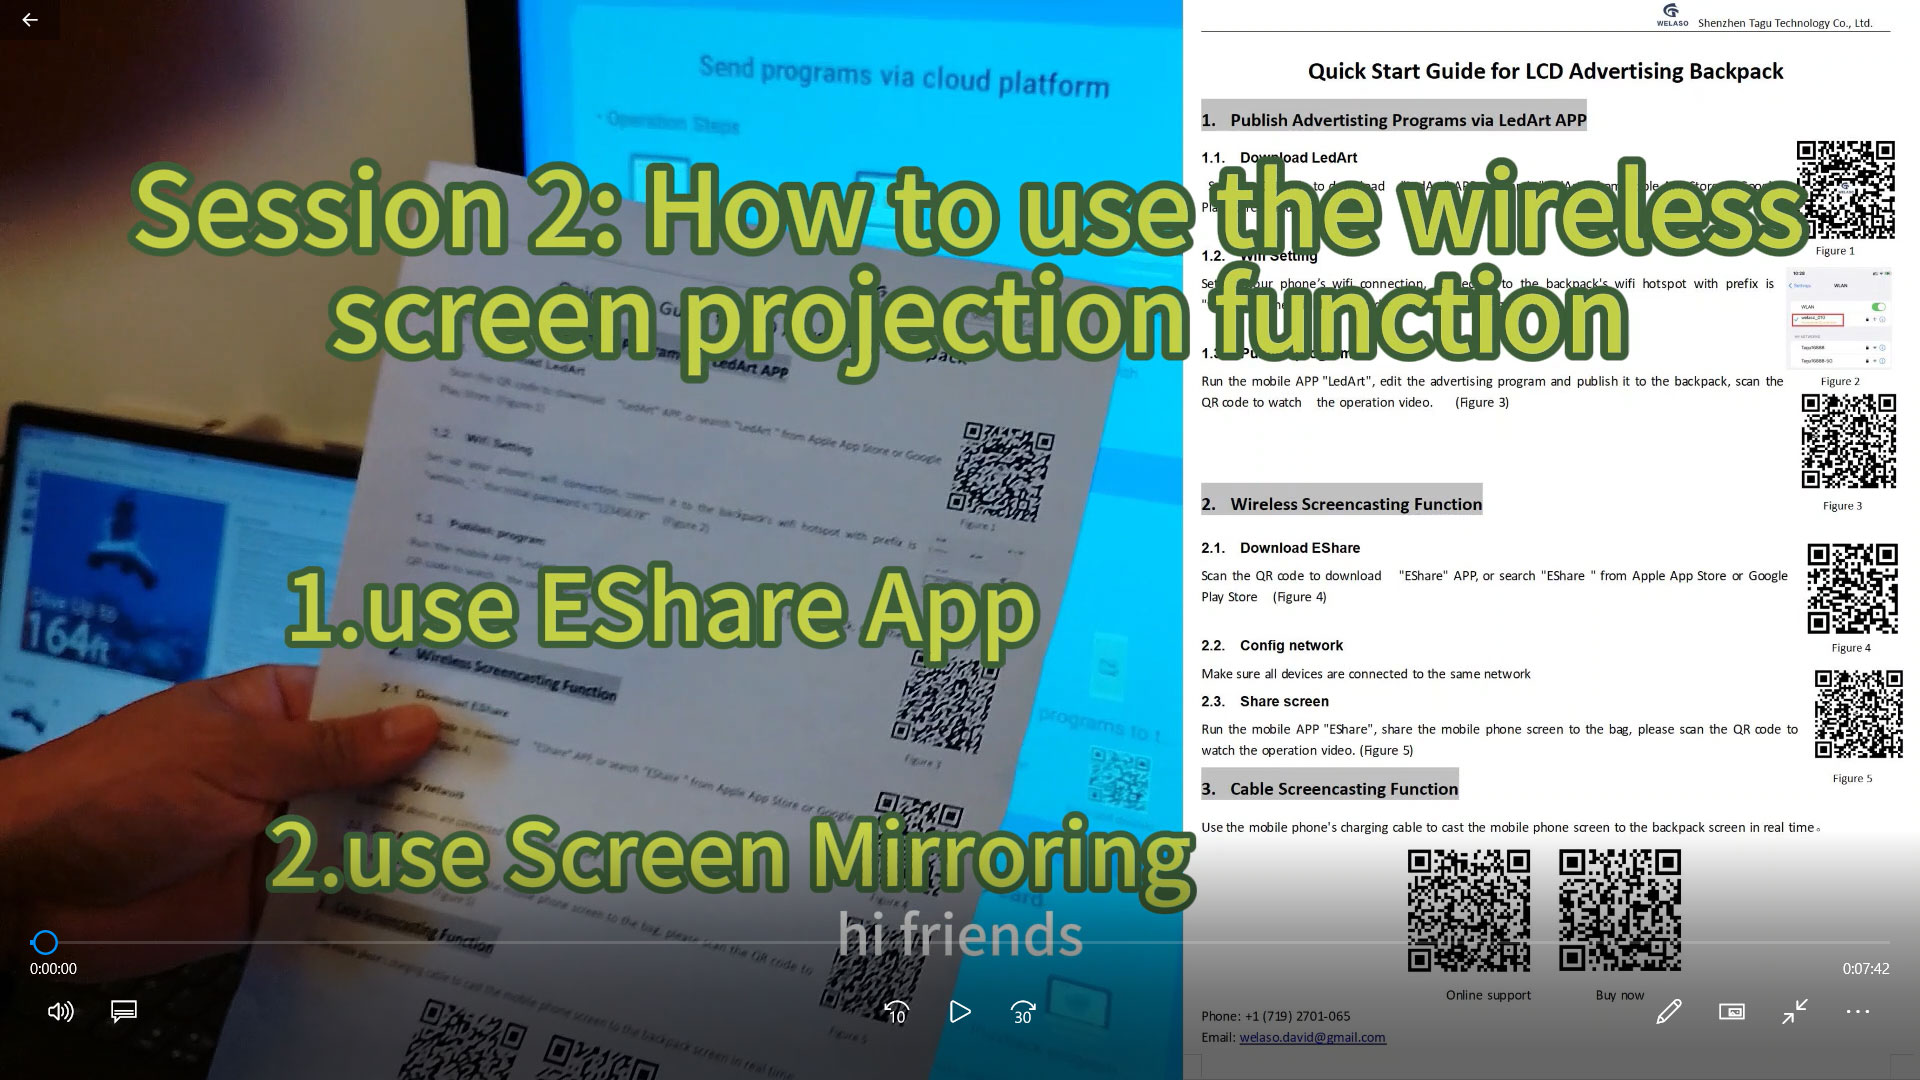 Session 2: How to use EShare and Screen Mirroring to wireless projector function